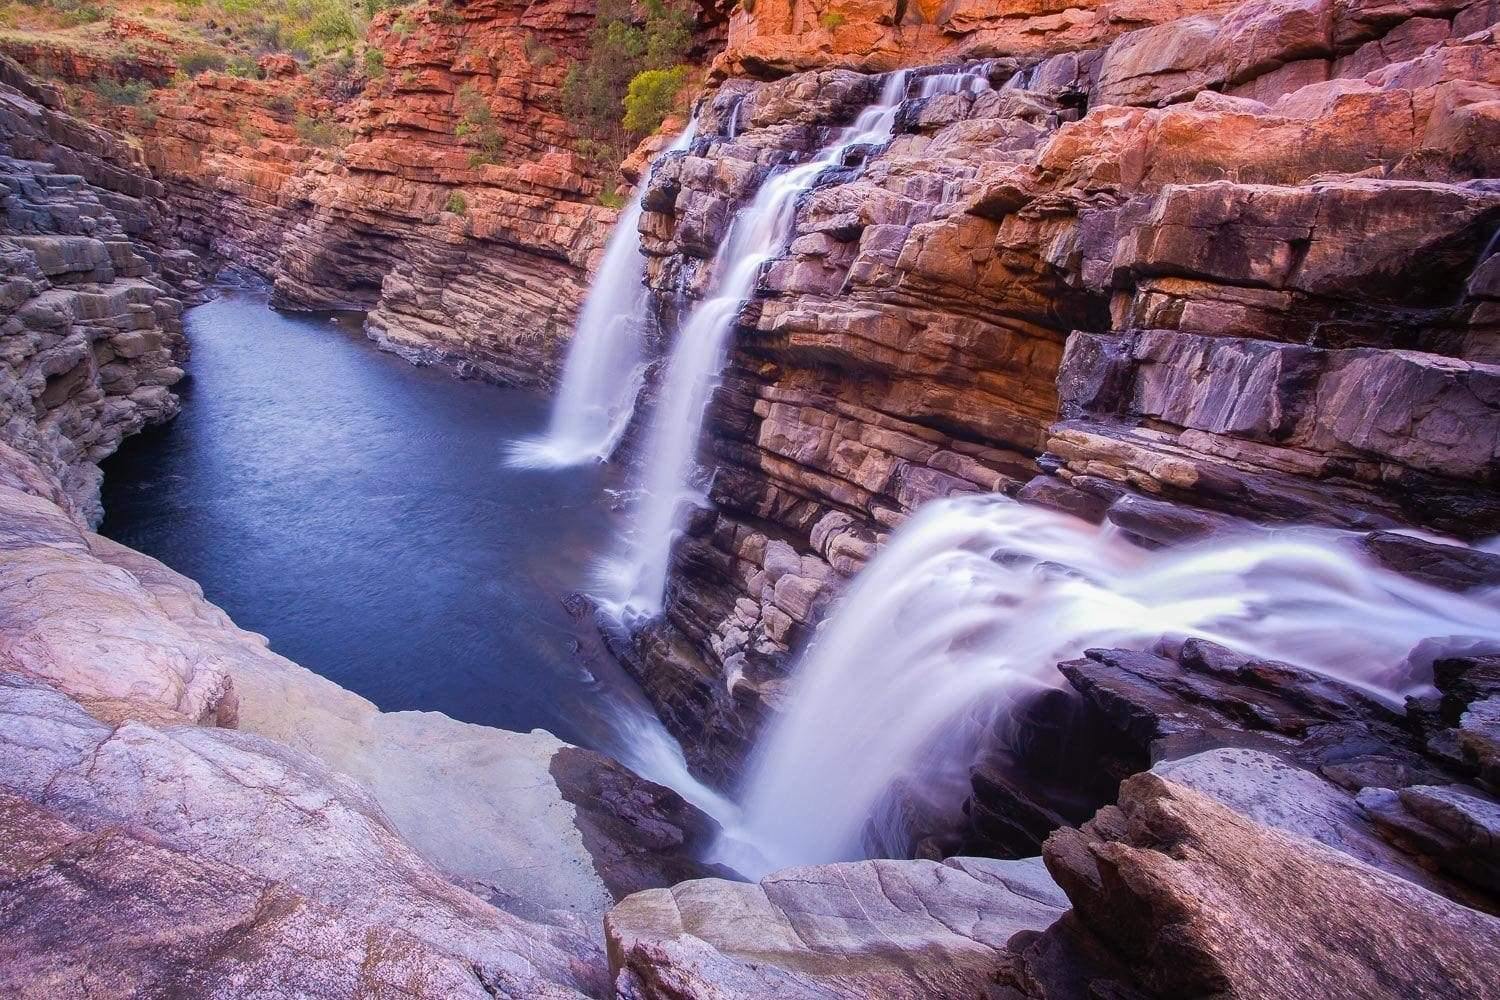 Multiple waterfalls from mountain walls in a small water course below, Lennard Falls - The Kimberley WA